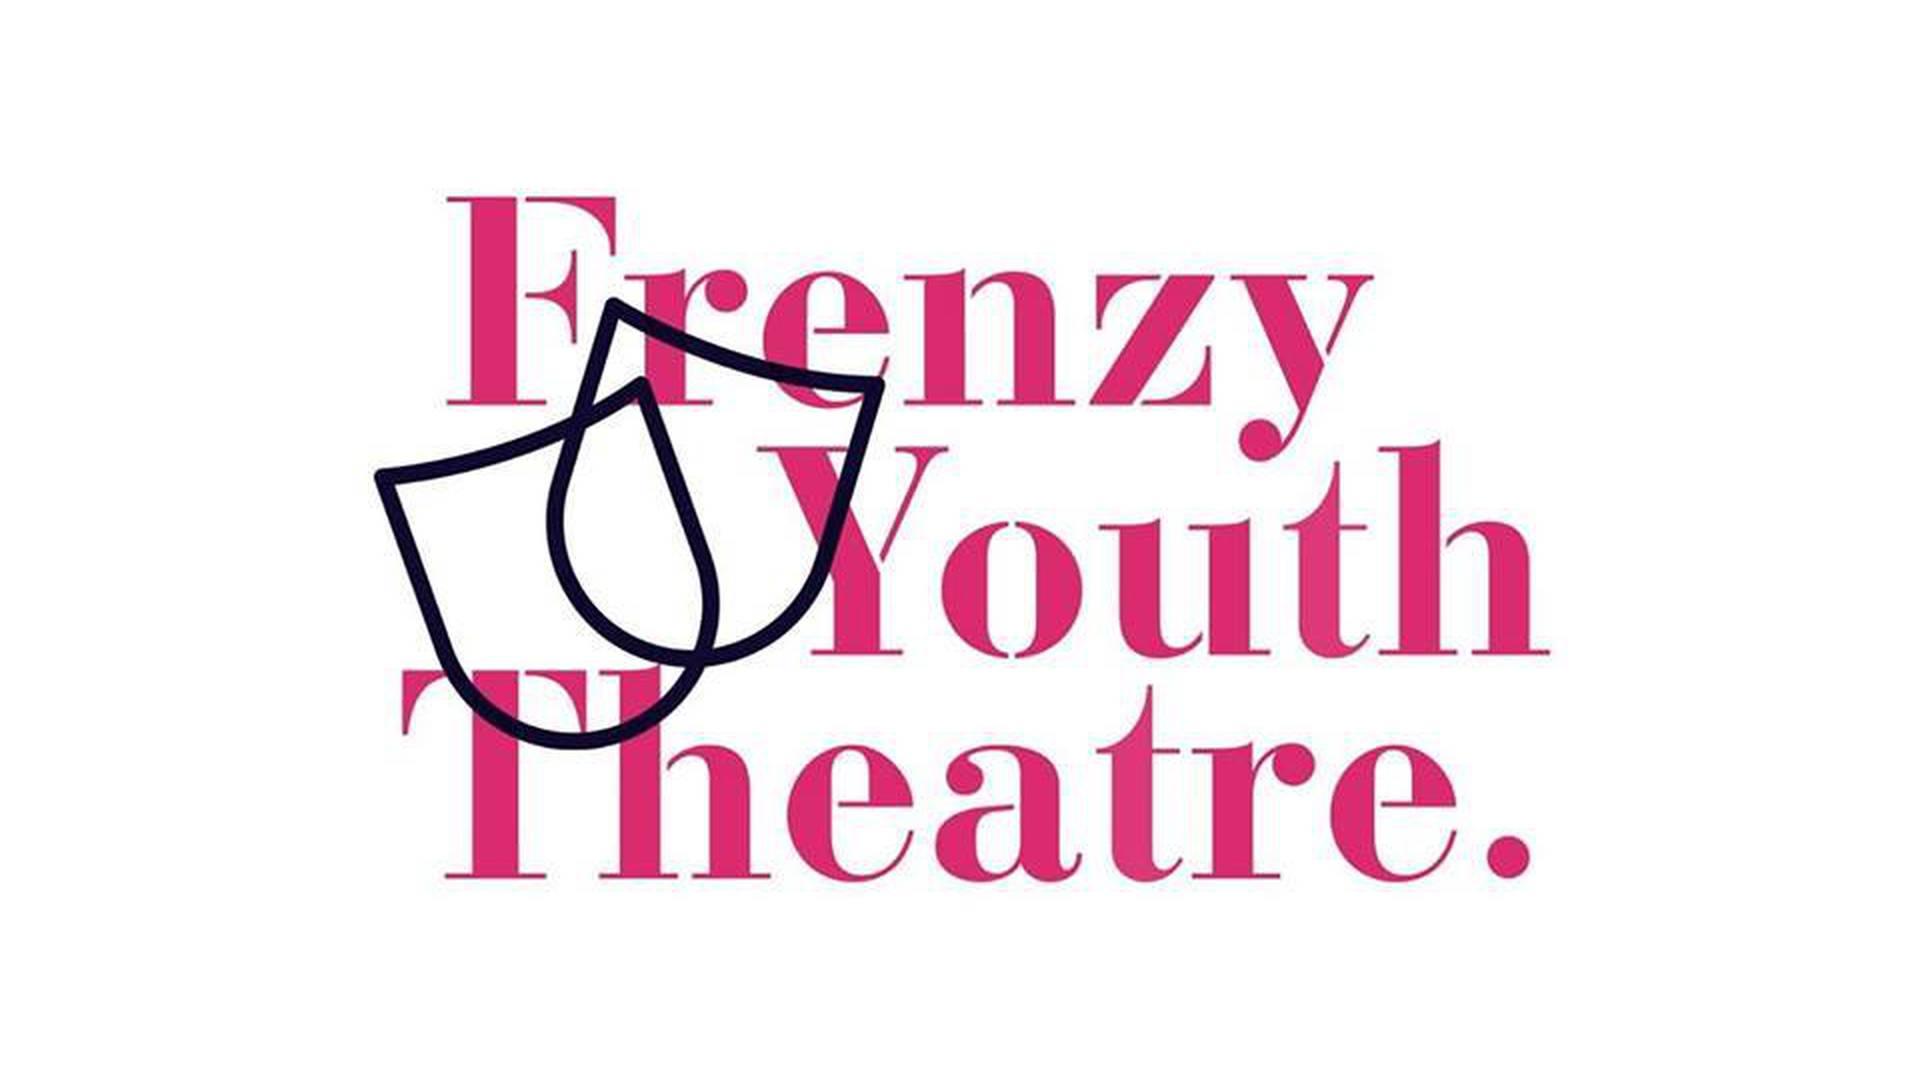 Frenzy Youth Theatre photo